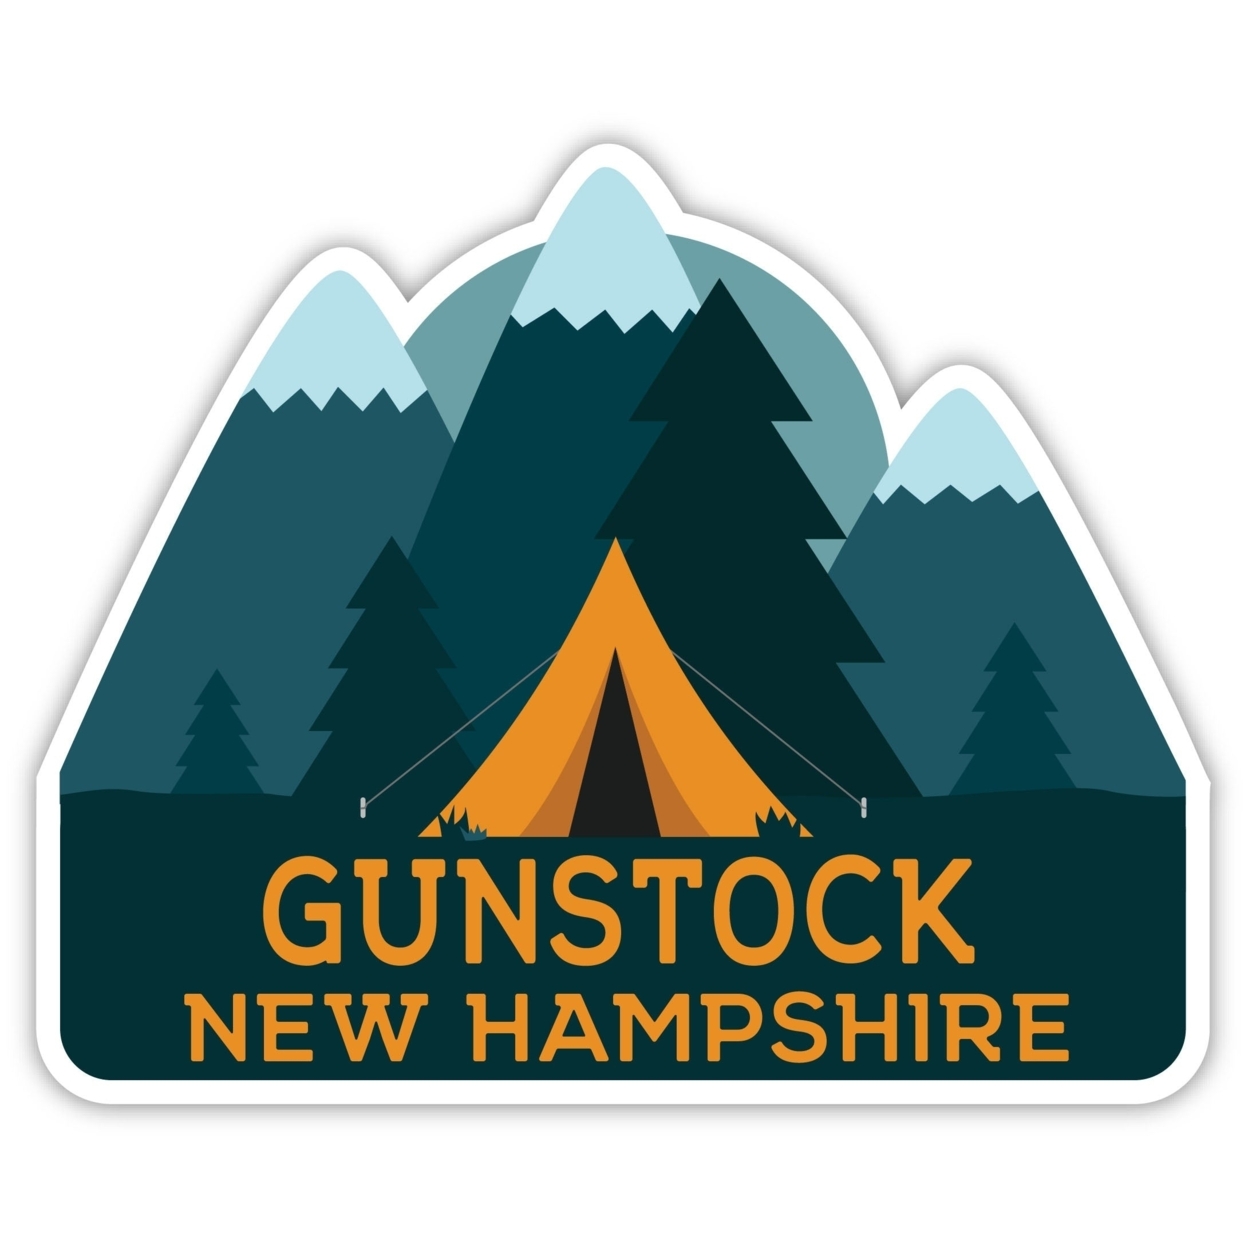 Gunstock New Hampshire Souvenir Decorative Stickers (Choose Theme And Size) - 4-Pack, 2-Inch, Tent